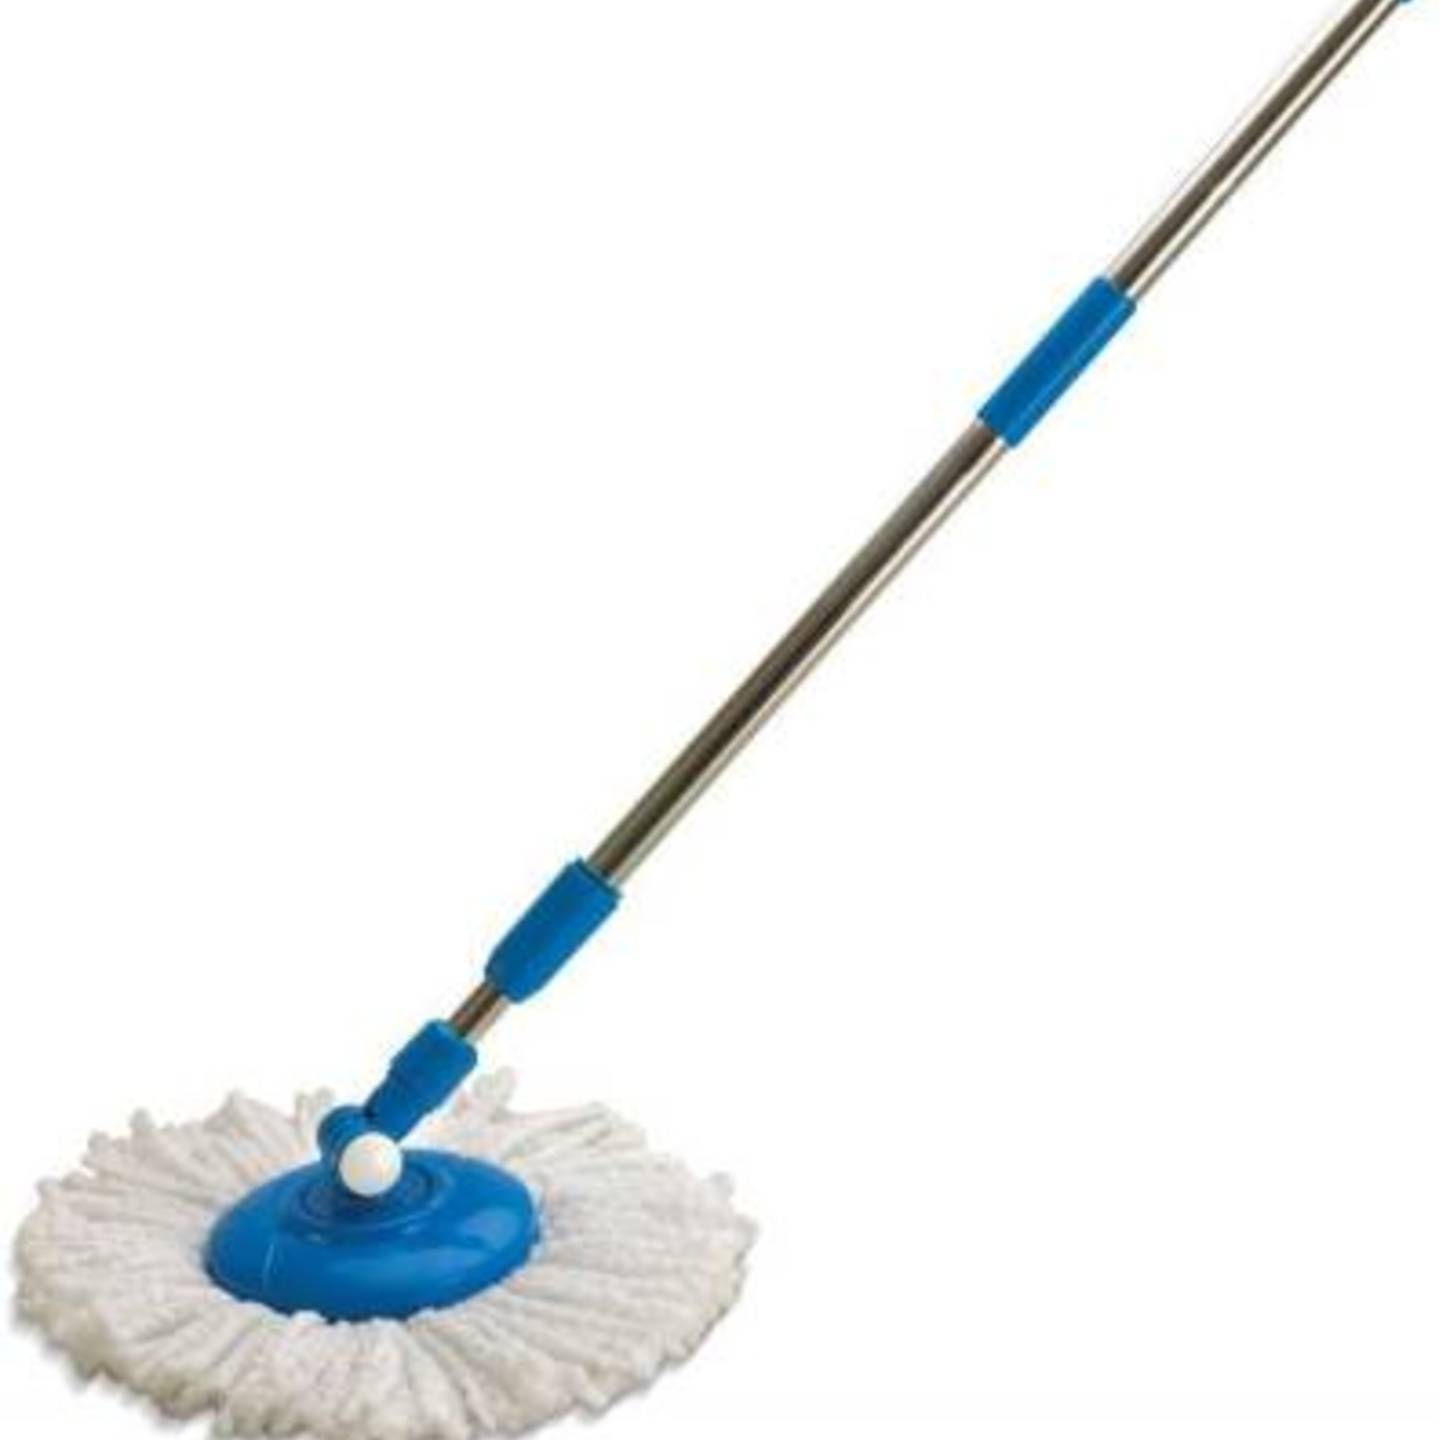 Microfiber Head Refill Stainless Steel Pole for 360° Floor Cleaning Strip Mop  (Multicolor 1 m) - Free Ship